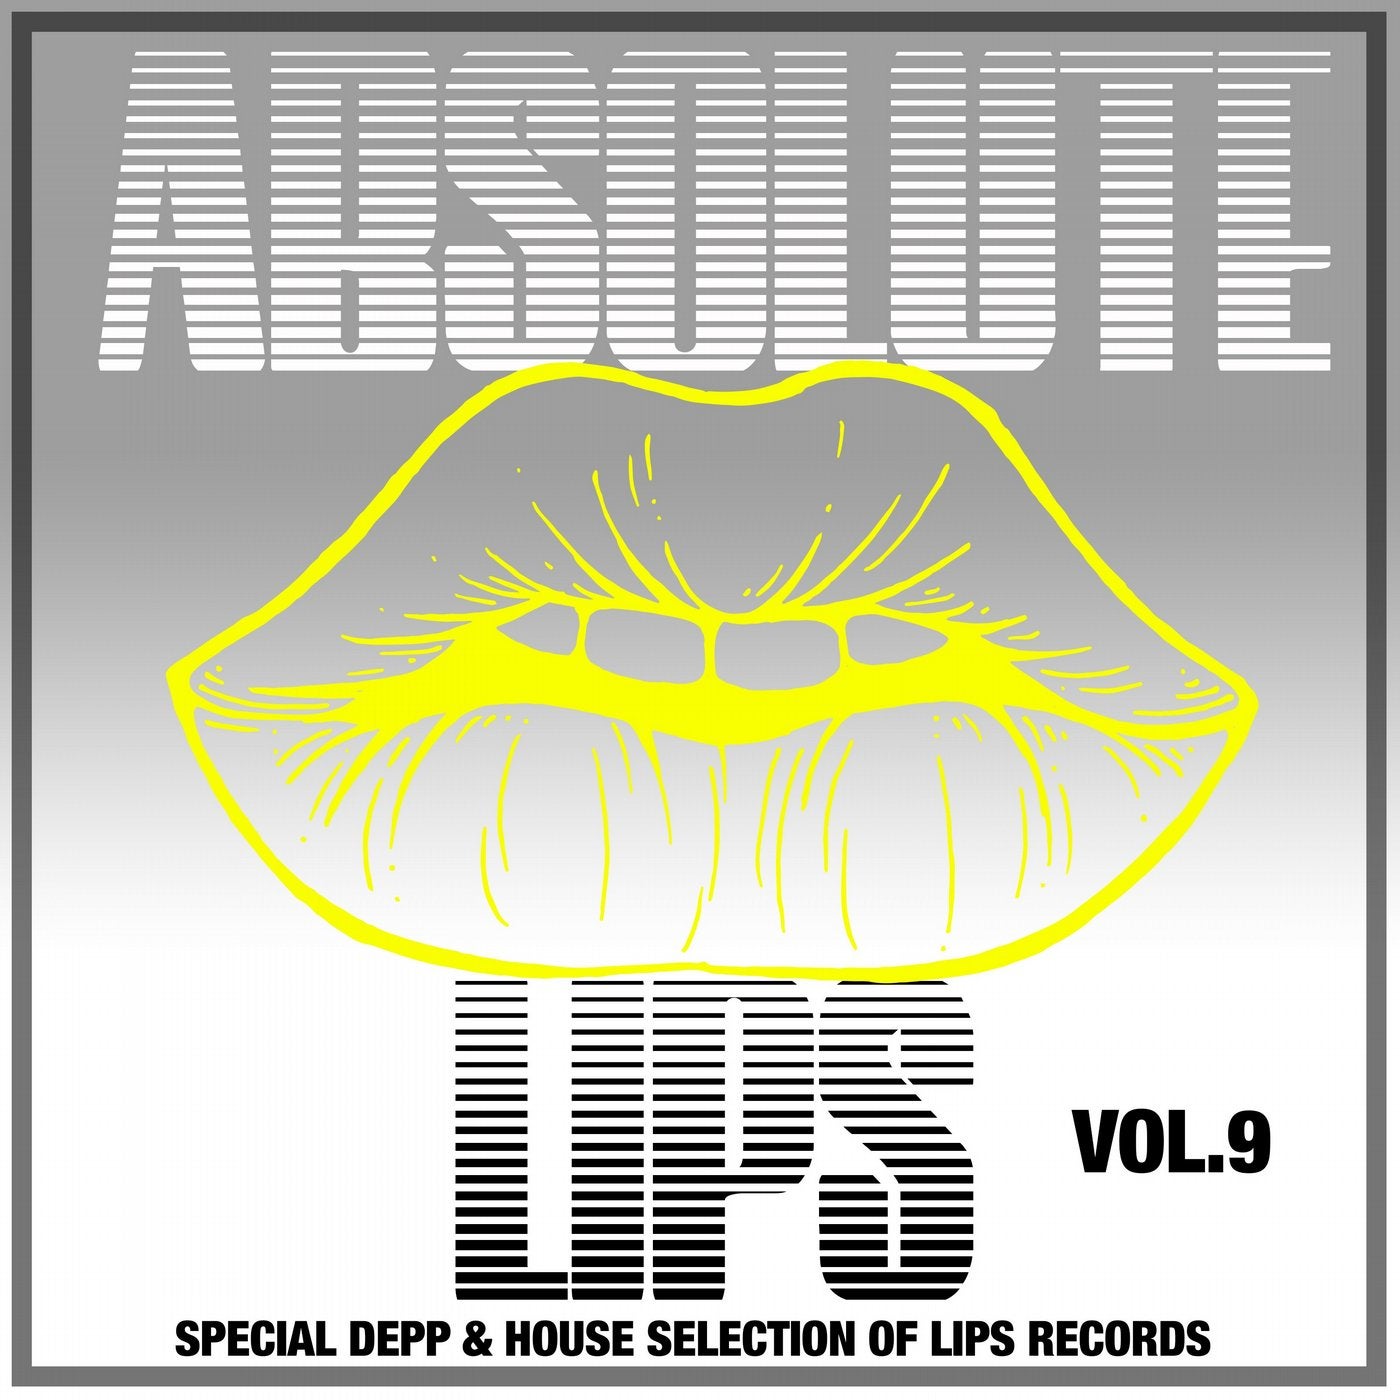 Absolute Lips, Vol. 9 (Special Deep & House Selection of Lips Records)